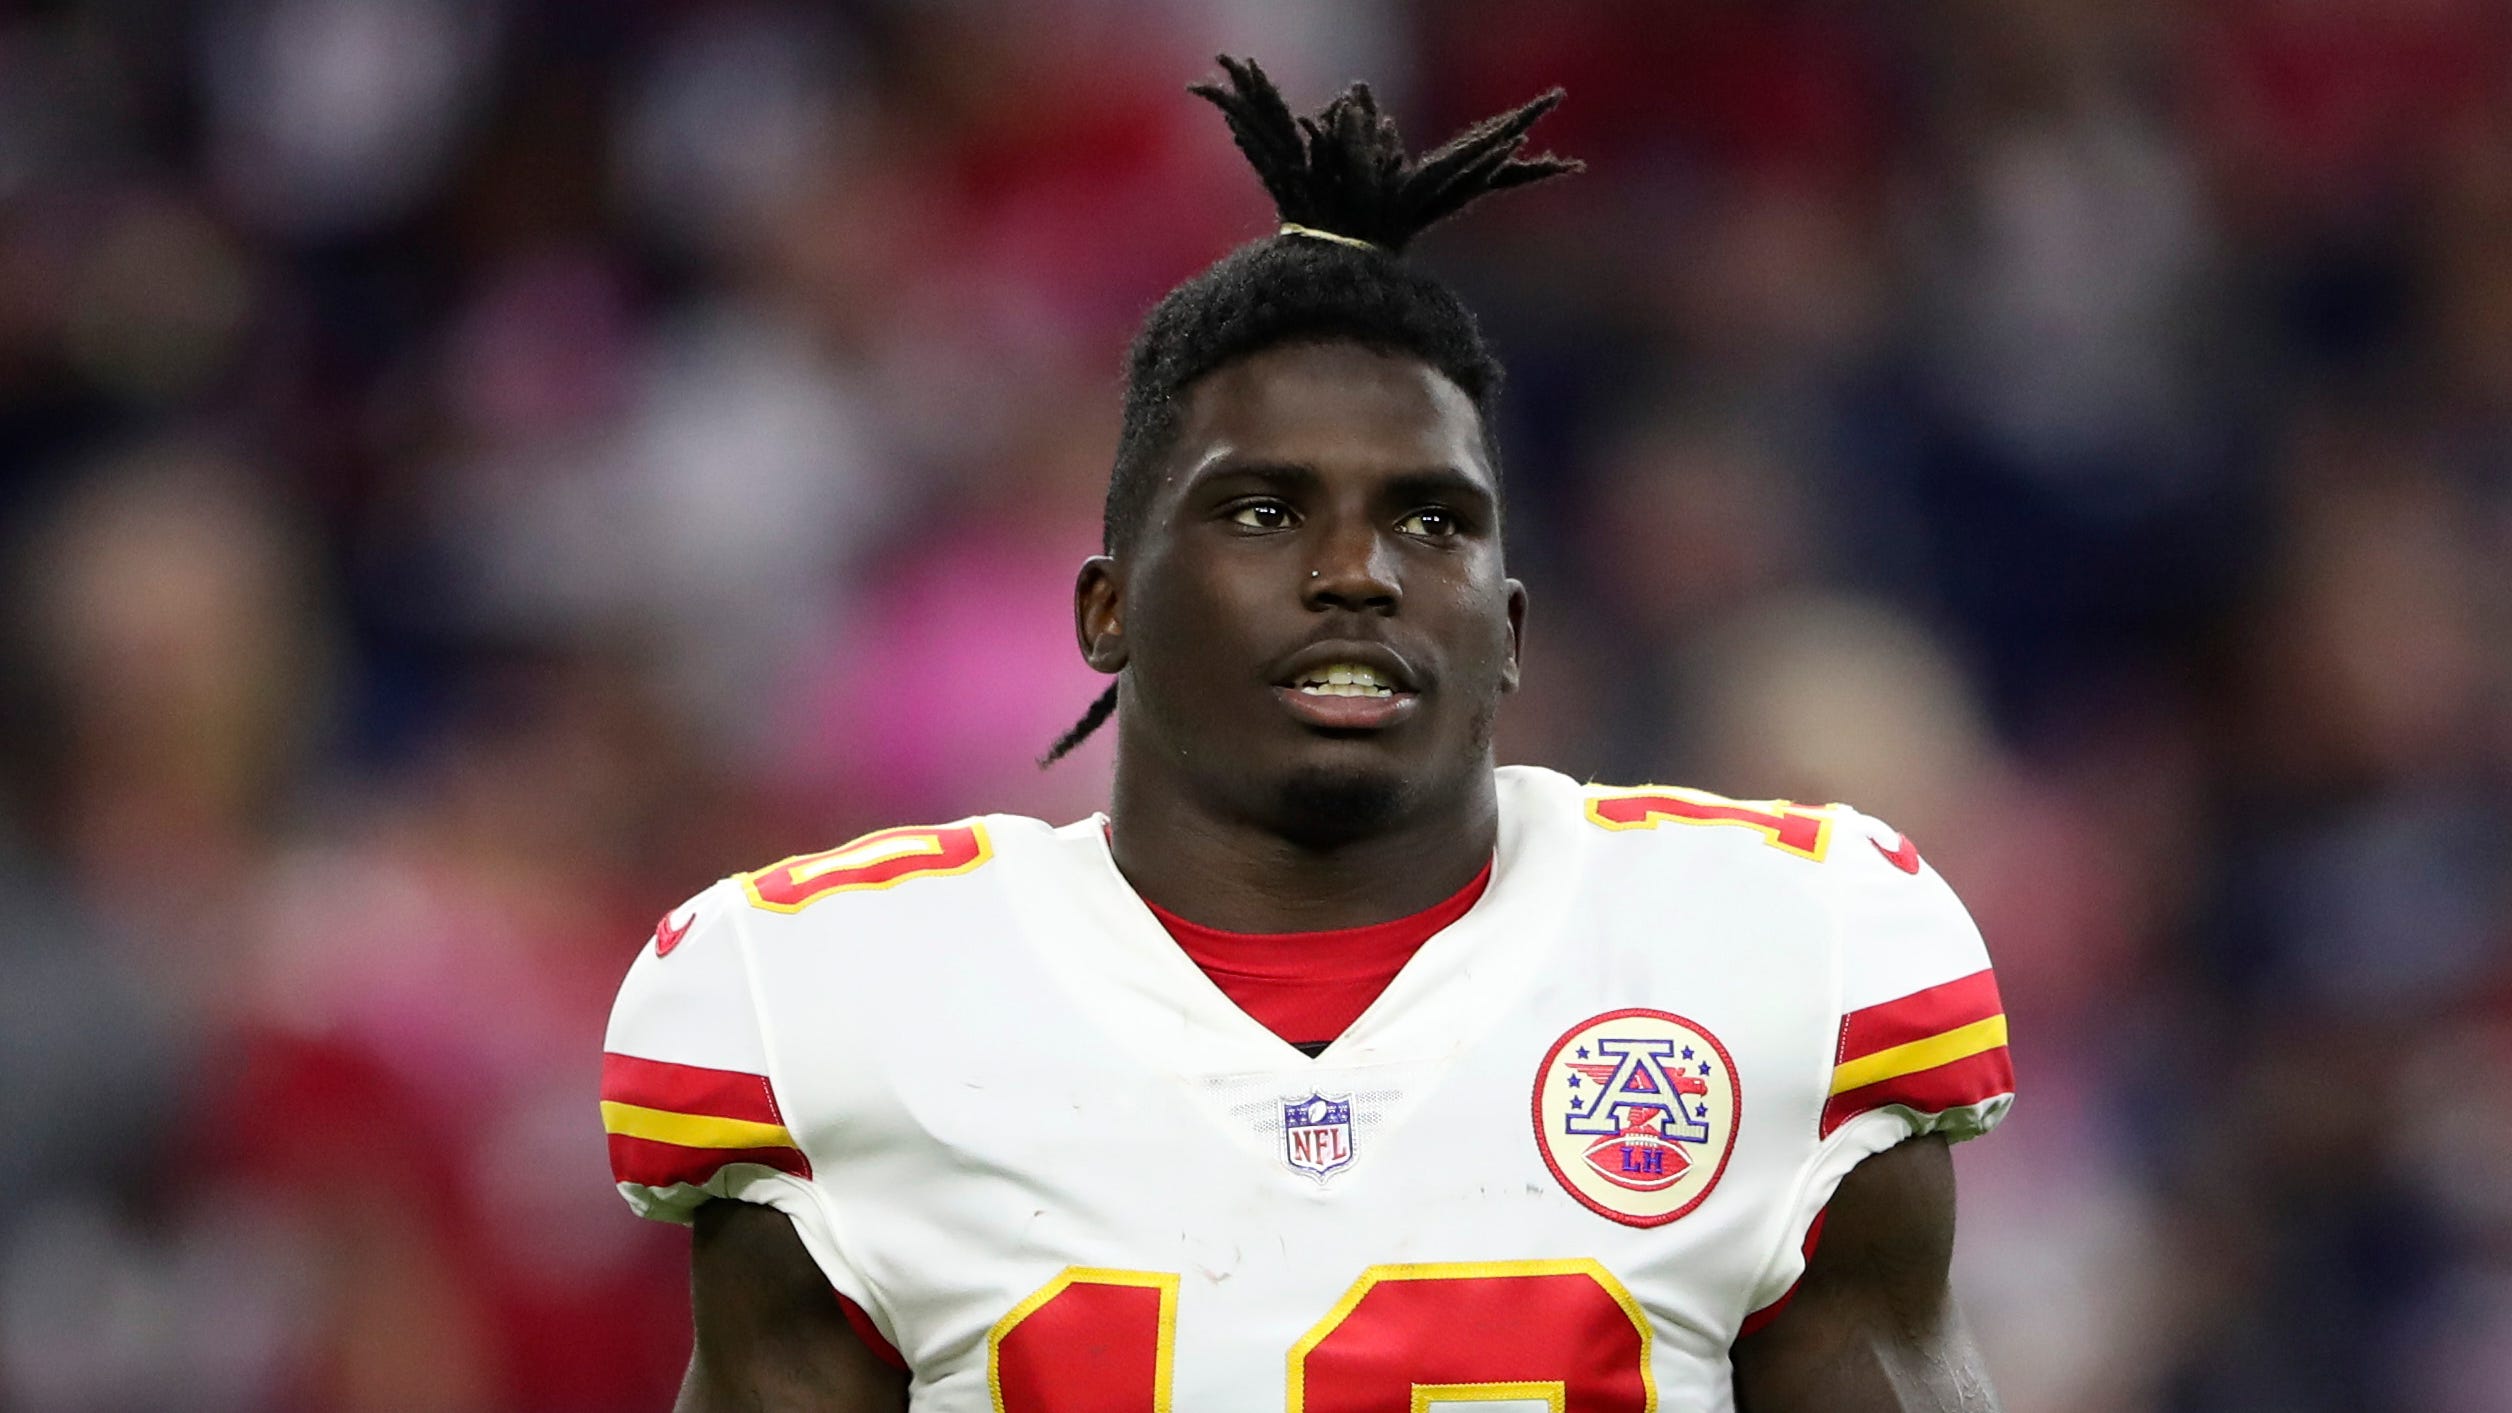 Chiefs: Tyreek Hill won't face charges in child abuse investigation